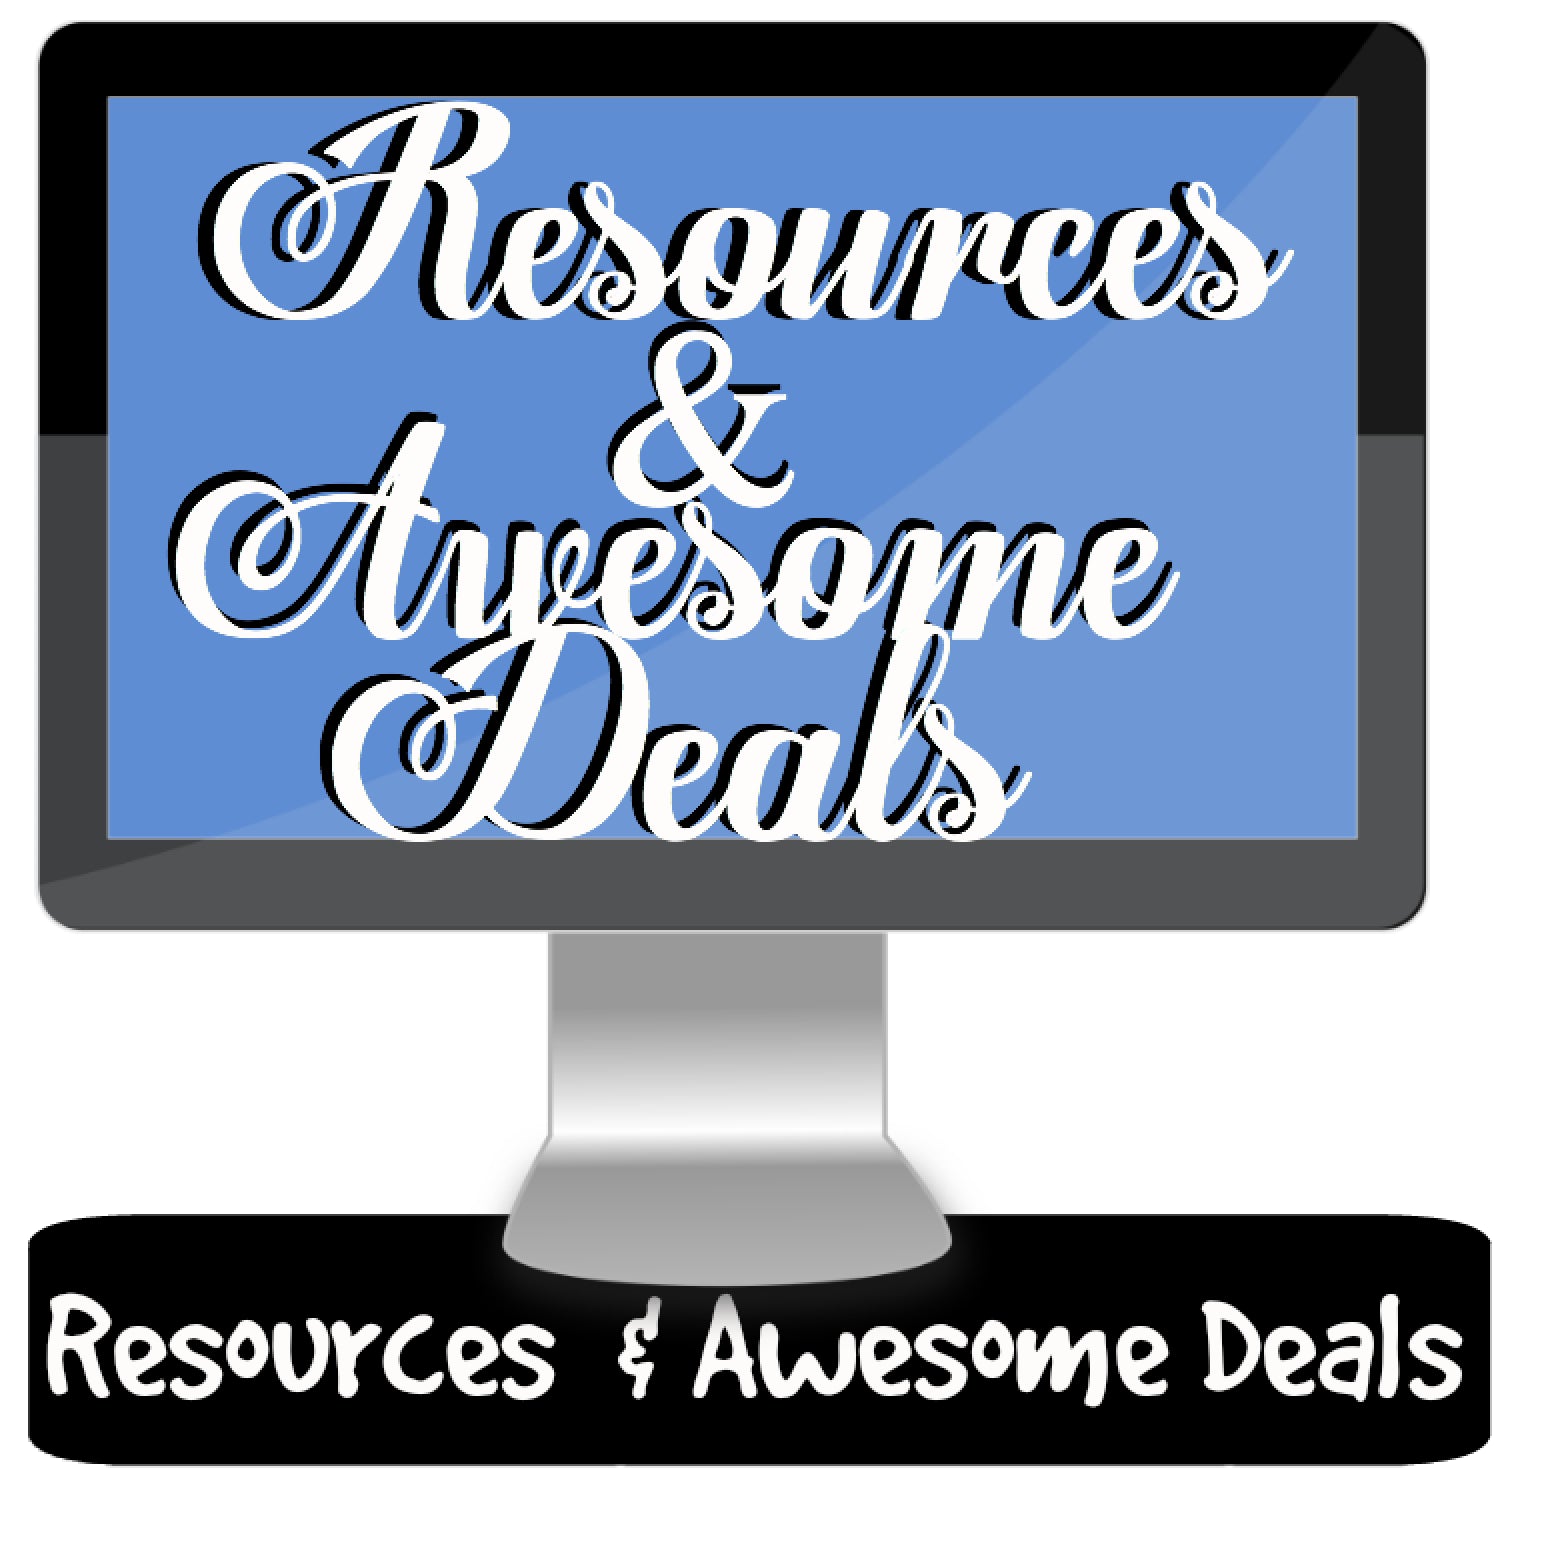 Resources & Awesome Deals